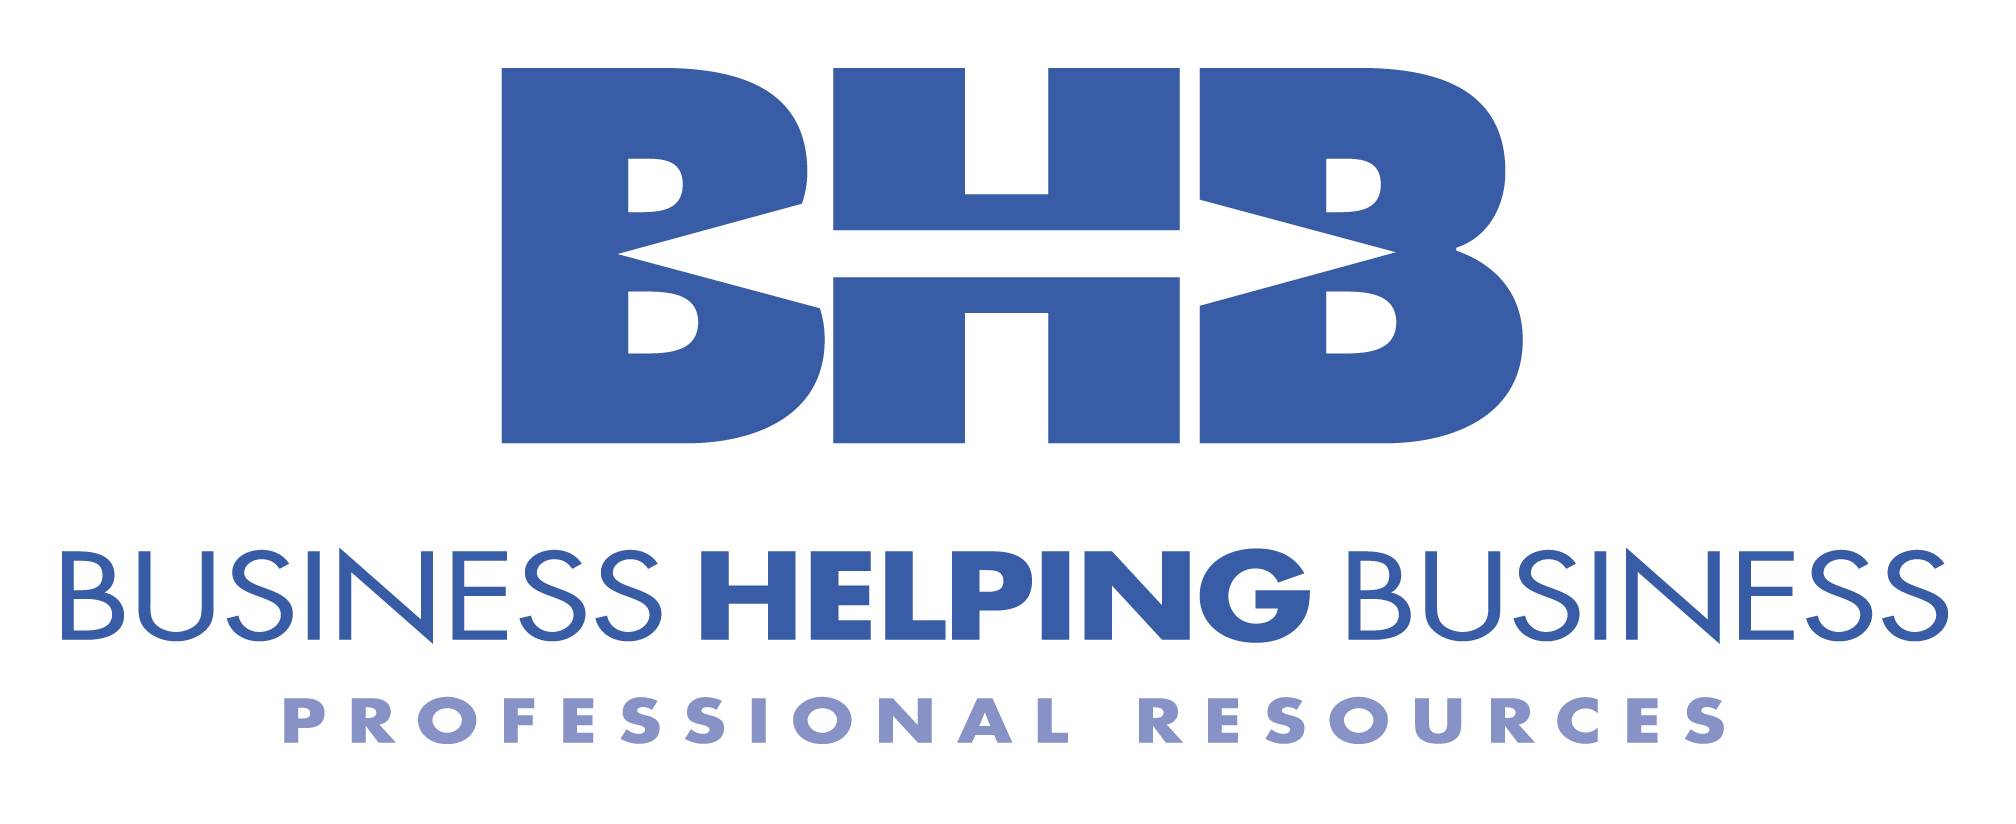 Business Helping Business (BHB) is a business solutions group